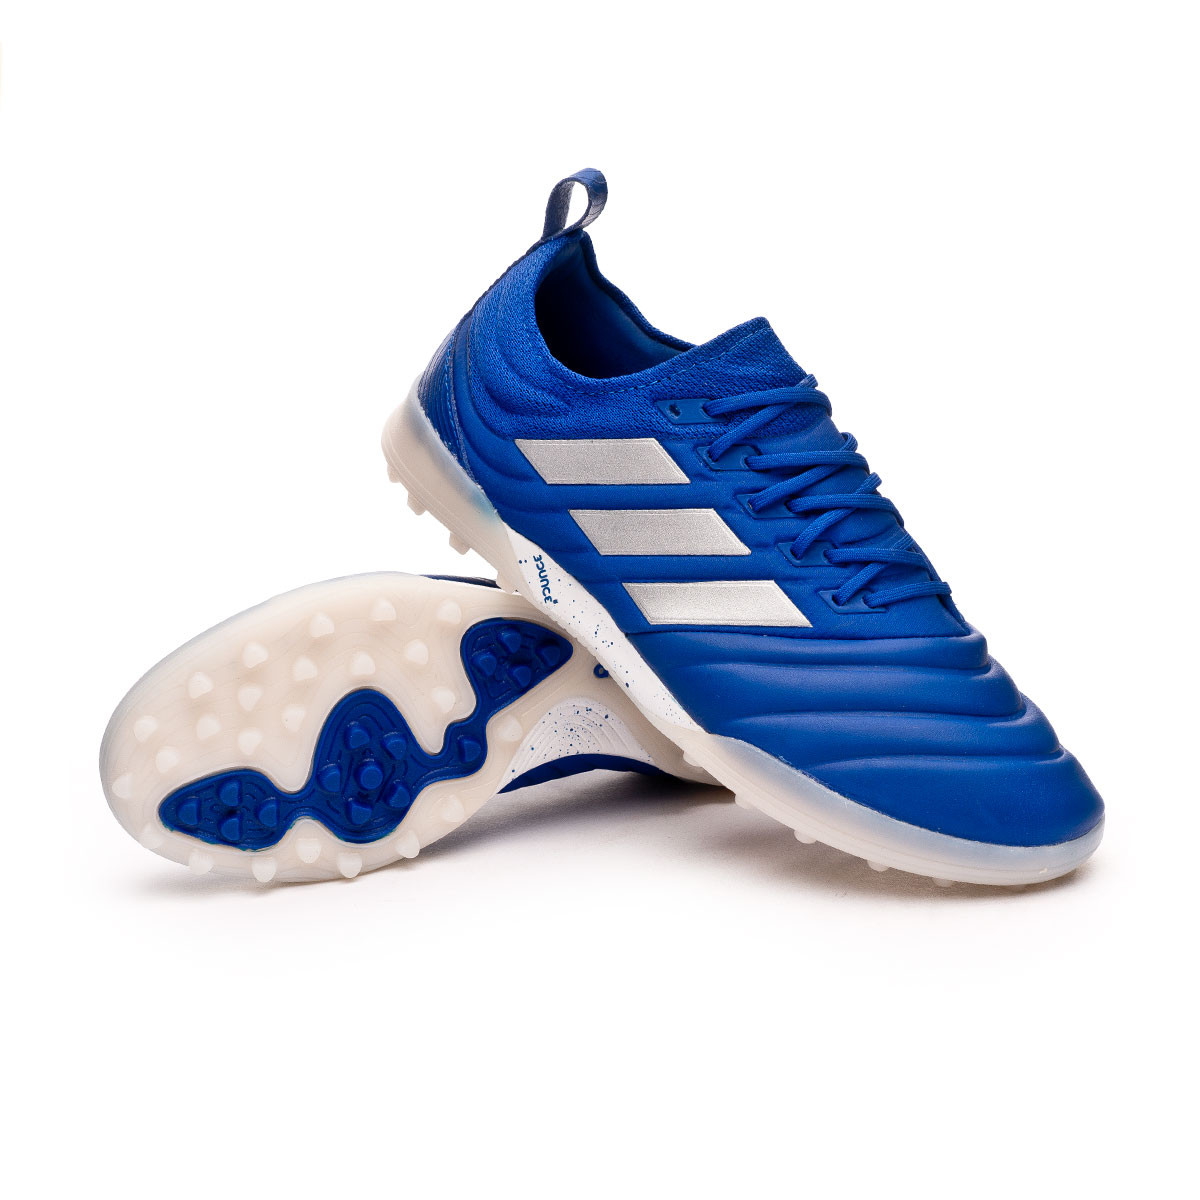 Adidas Copa Team Turf Factory Sale, UP TO 52% OFF